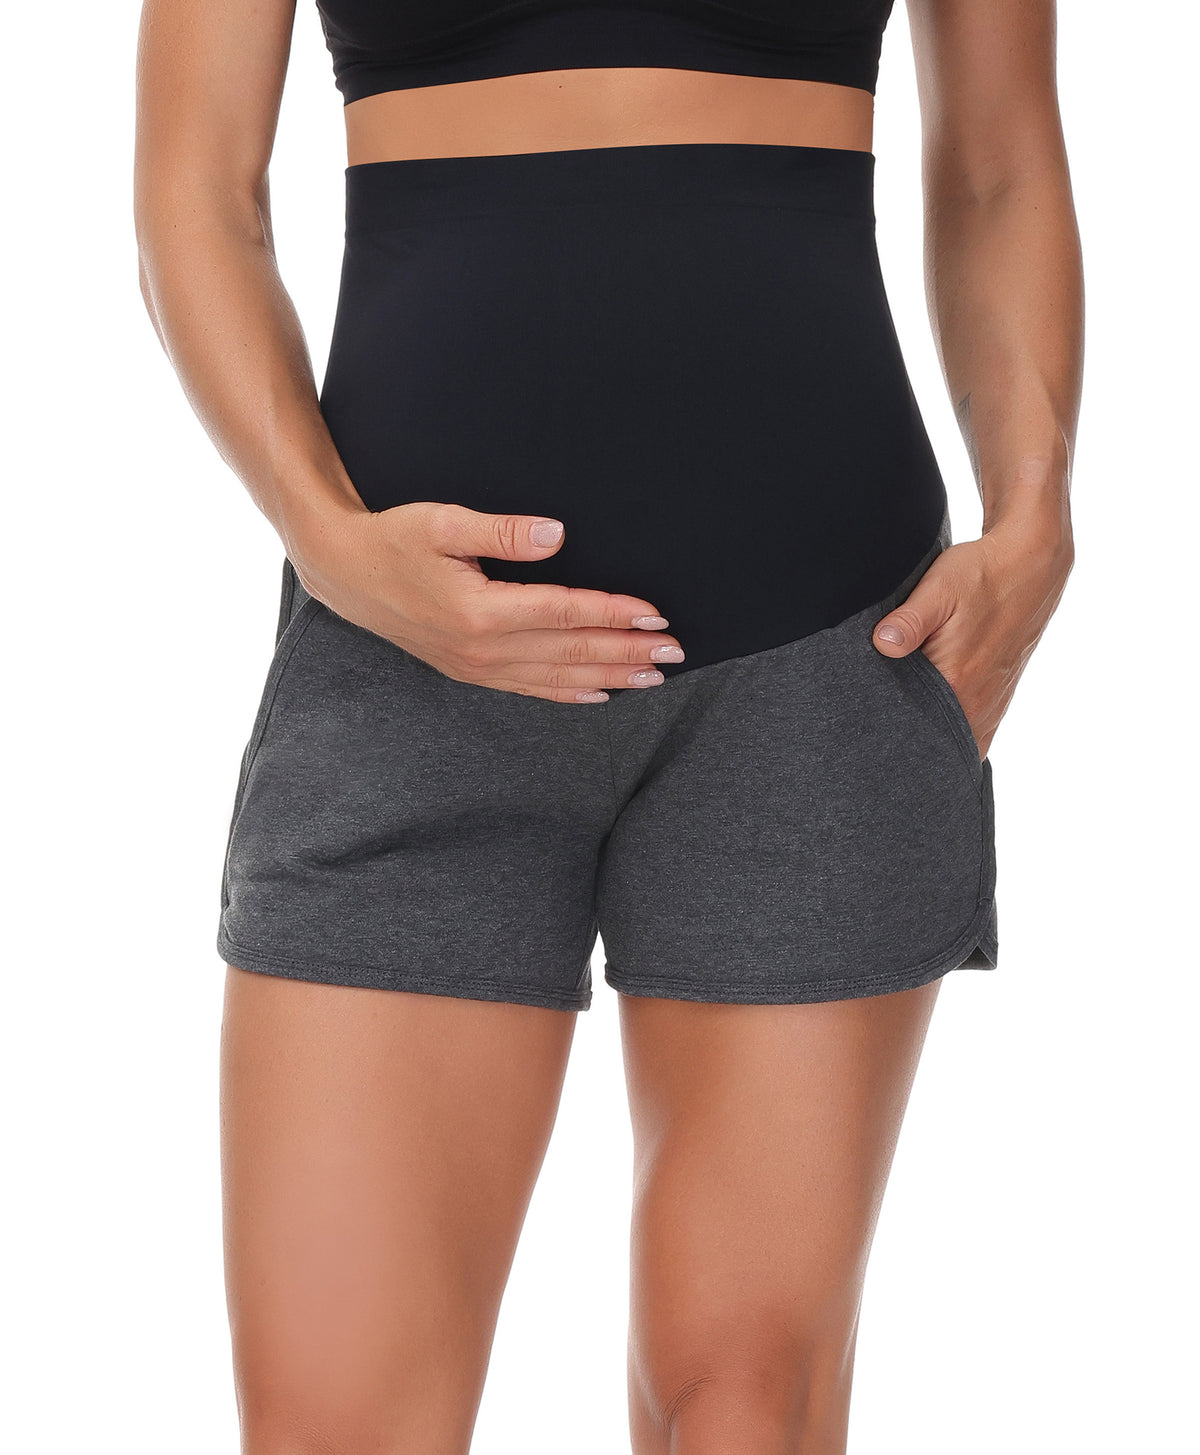 HOFISH Women's Maternity Yoga Shorts Over The Belly Active Summer Running  Workout Pants Shorts Pockets【Mix Color Series】